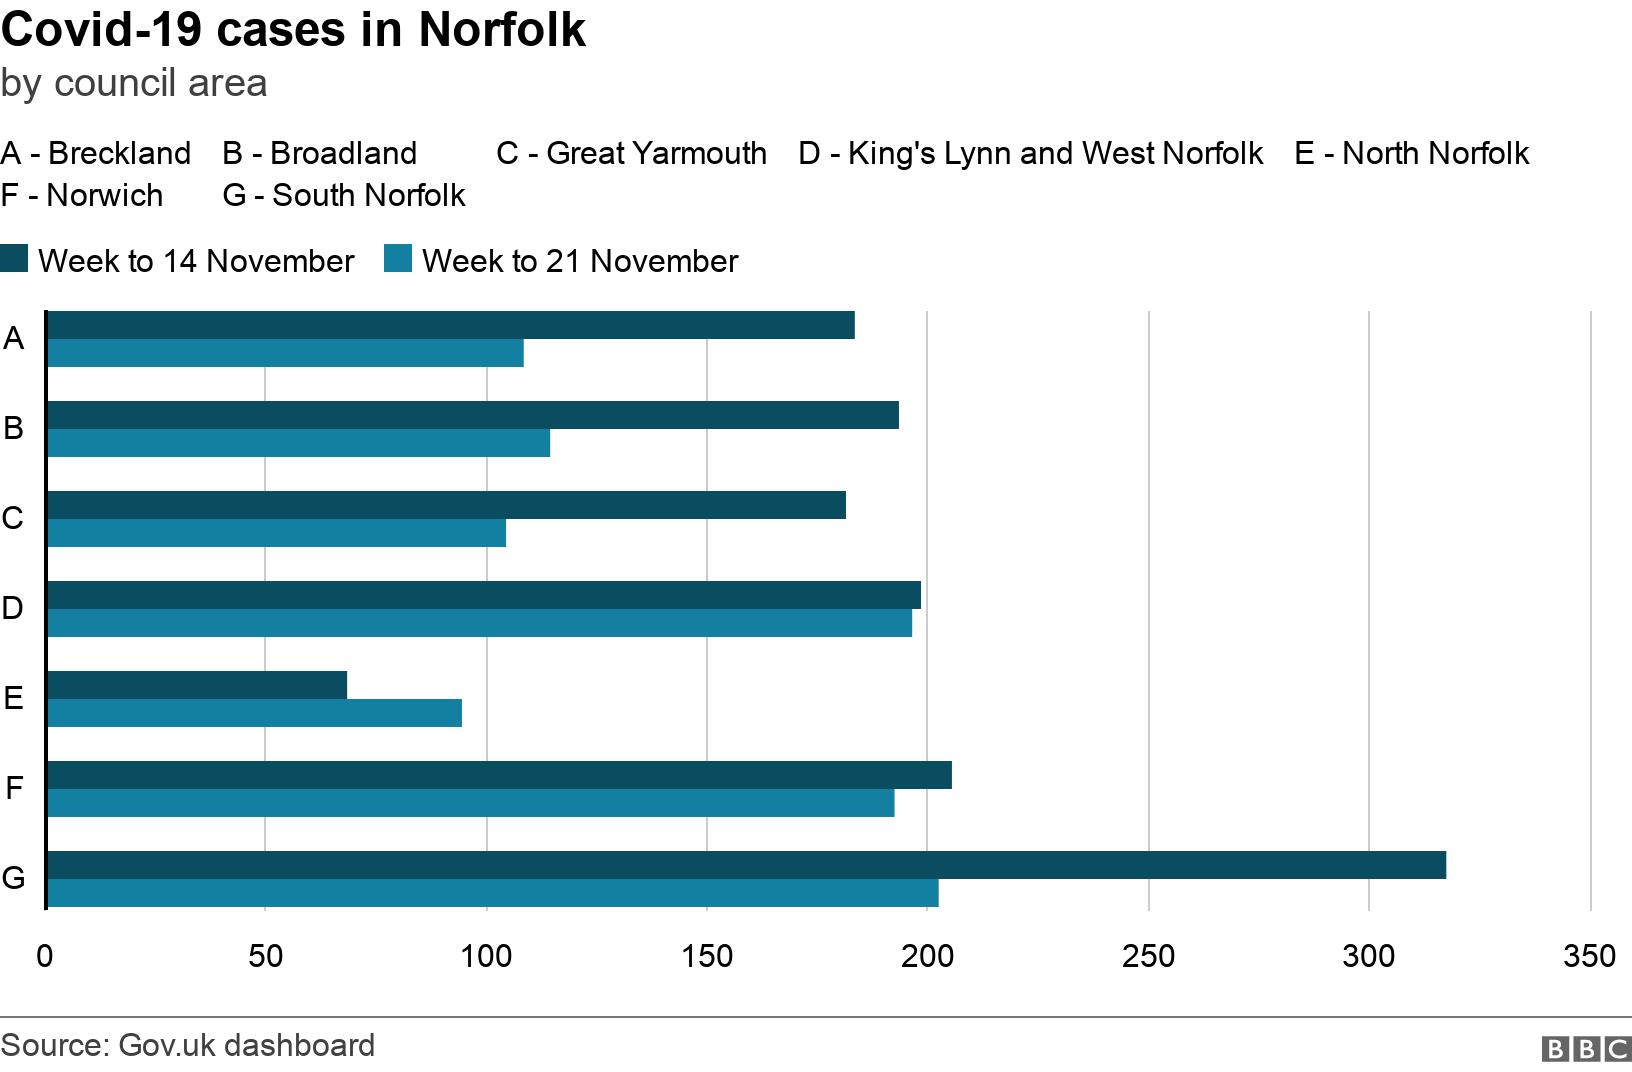 Covid-19 cases in Norfolk. by council area. Cases of Covid-19 in Norfolk by council area in week to 21 November .